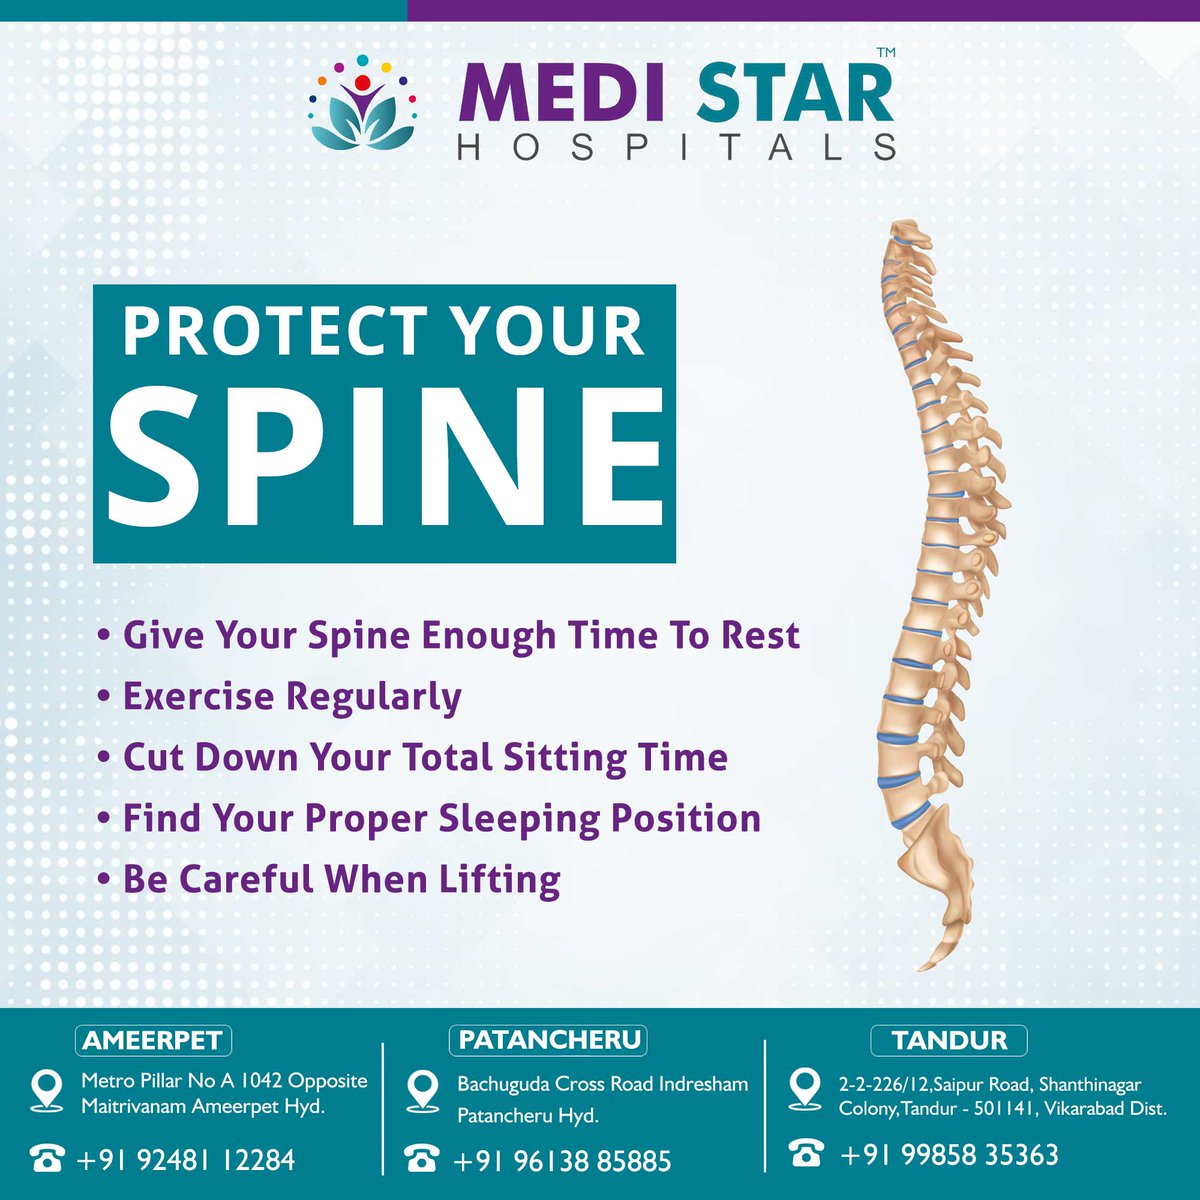 To protect the spine,  follow the steps, and stay healthy and strong.

#Medistarhospitals #Medistarhospitals1 #patancheruvu #Ameerpet #Tandur #Hyderabad #backpain #backpaintips #BackPainSolution #excersise #ProtectYourSpine